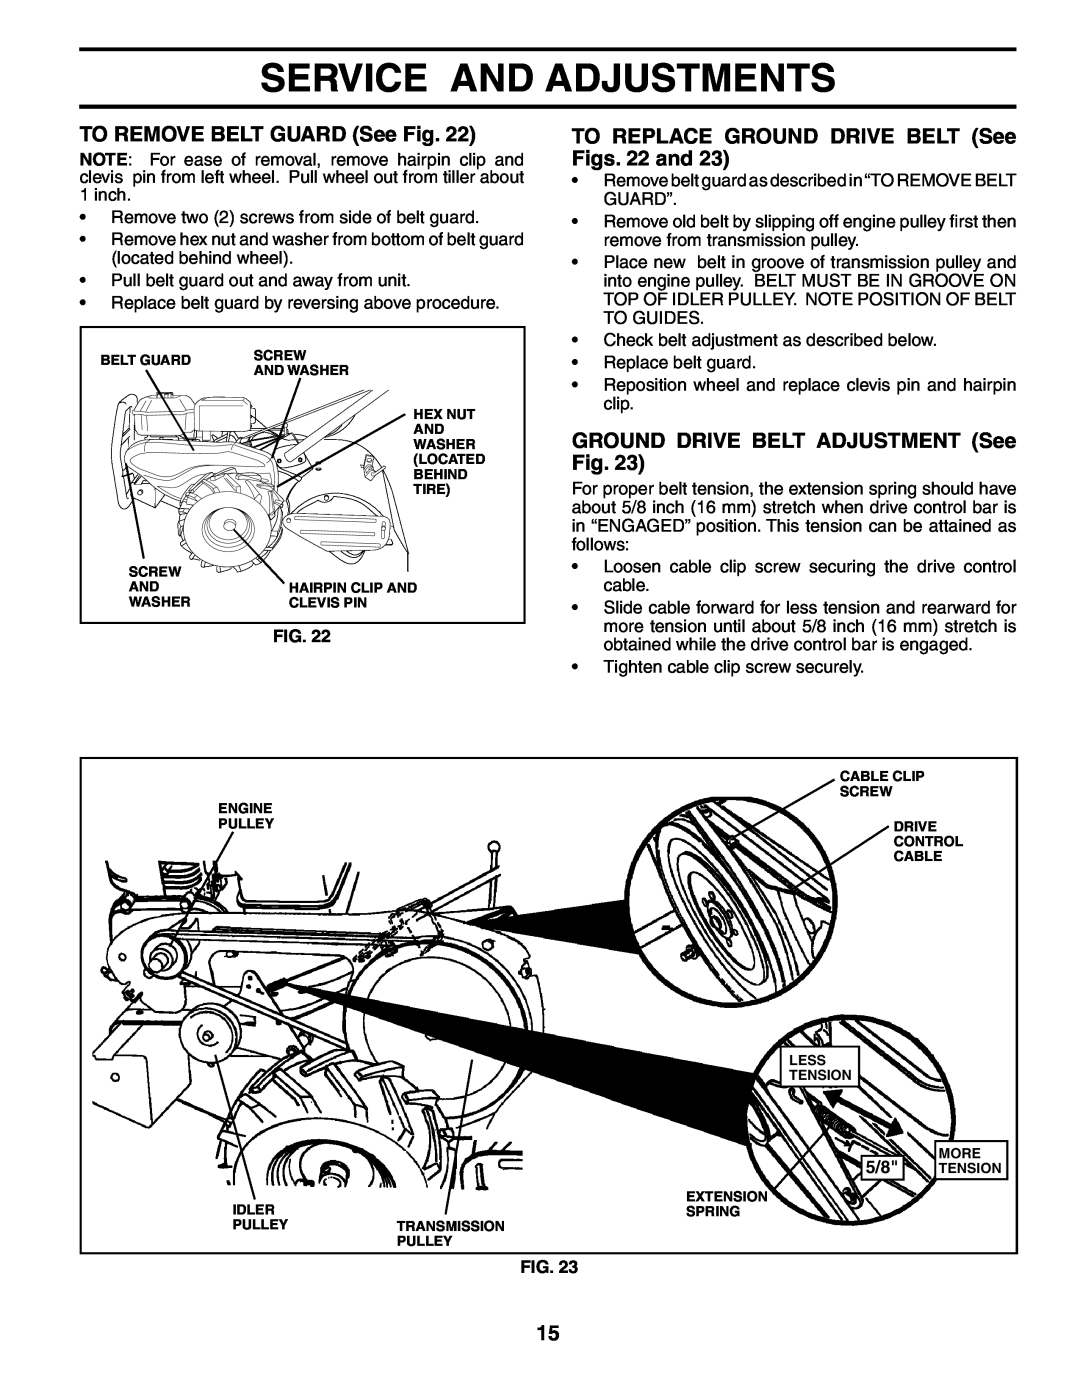 Poulan PRRT65B TO REMOVE BELT GUARD See Fig, TO REPLACE GROUND DRIVE BELT See Figs. 22 and, Service And Adjustments 